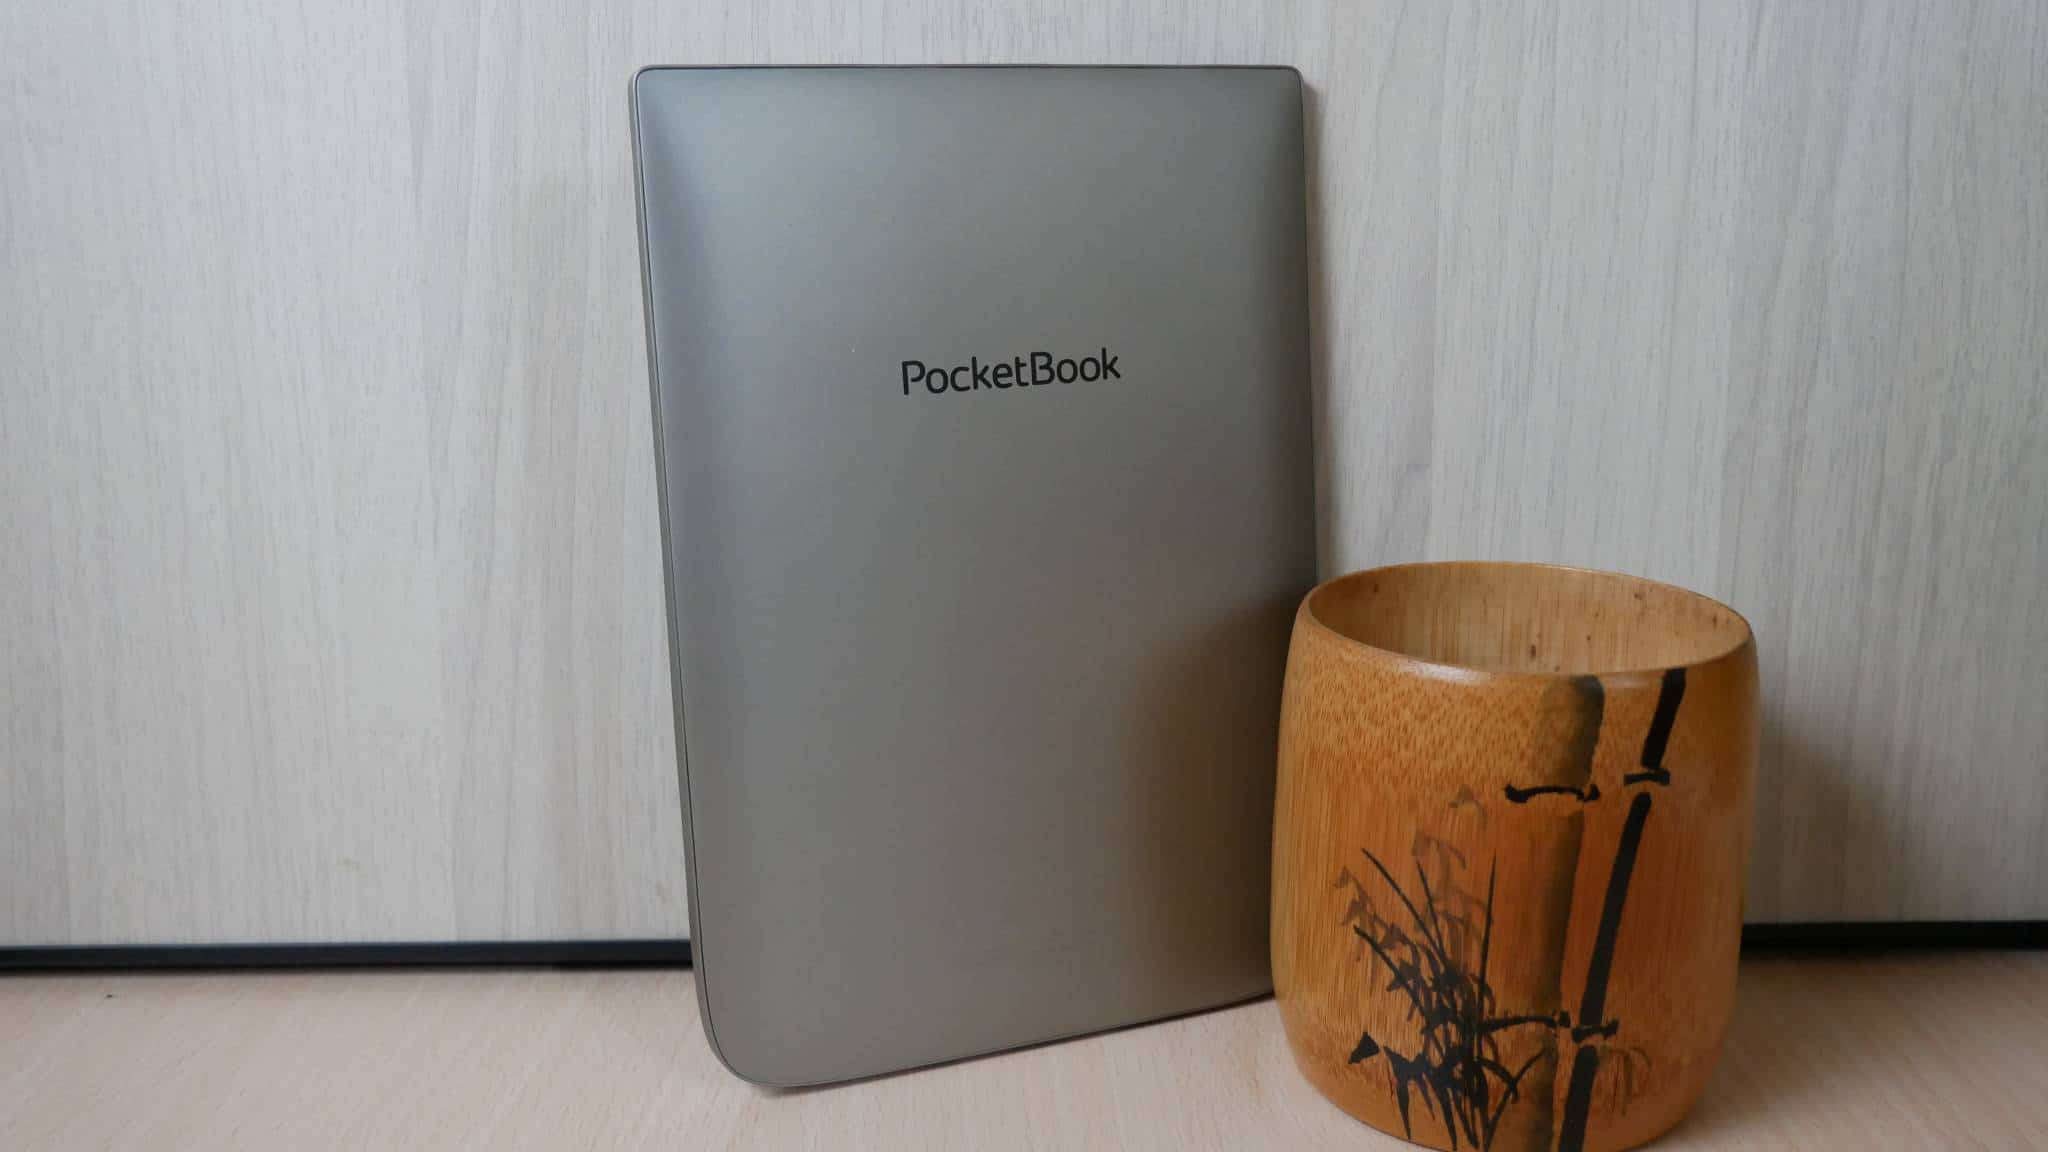 PocketBook InkPad Color 3 e-reader review - Great for comic fans thanks to  vibrant colors -  Reviews